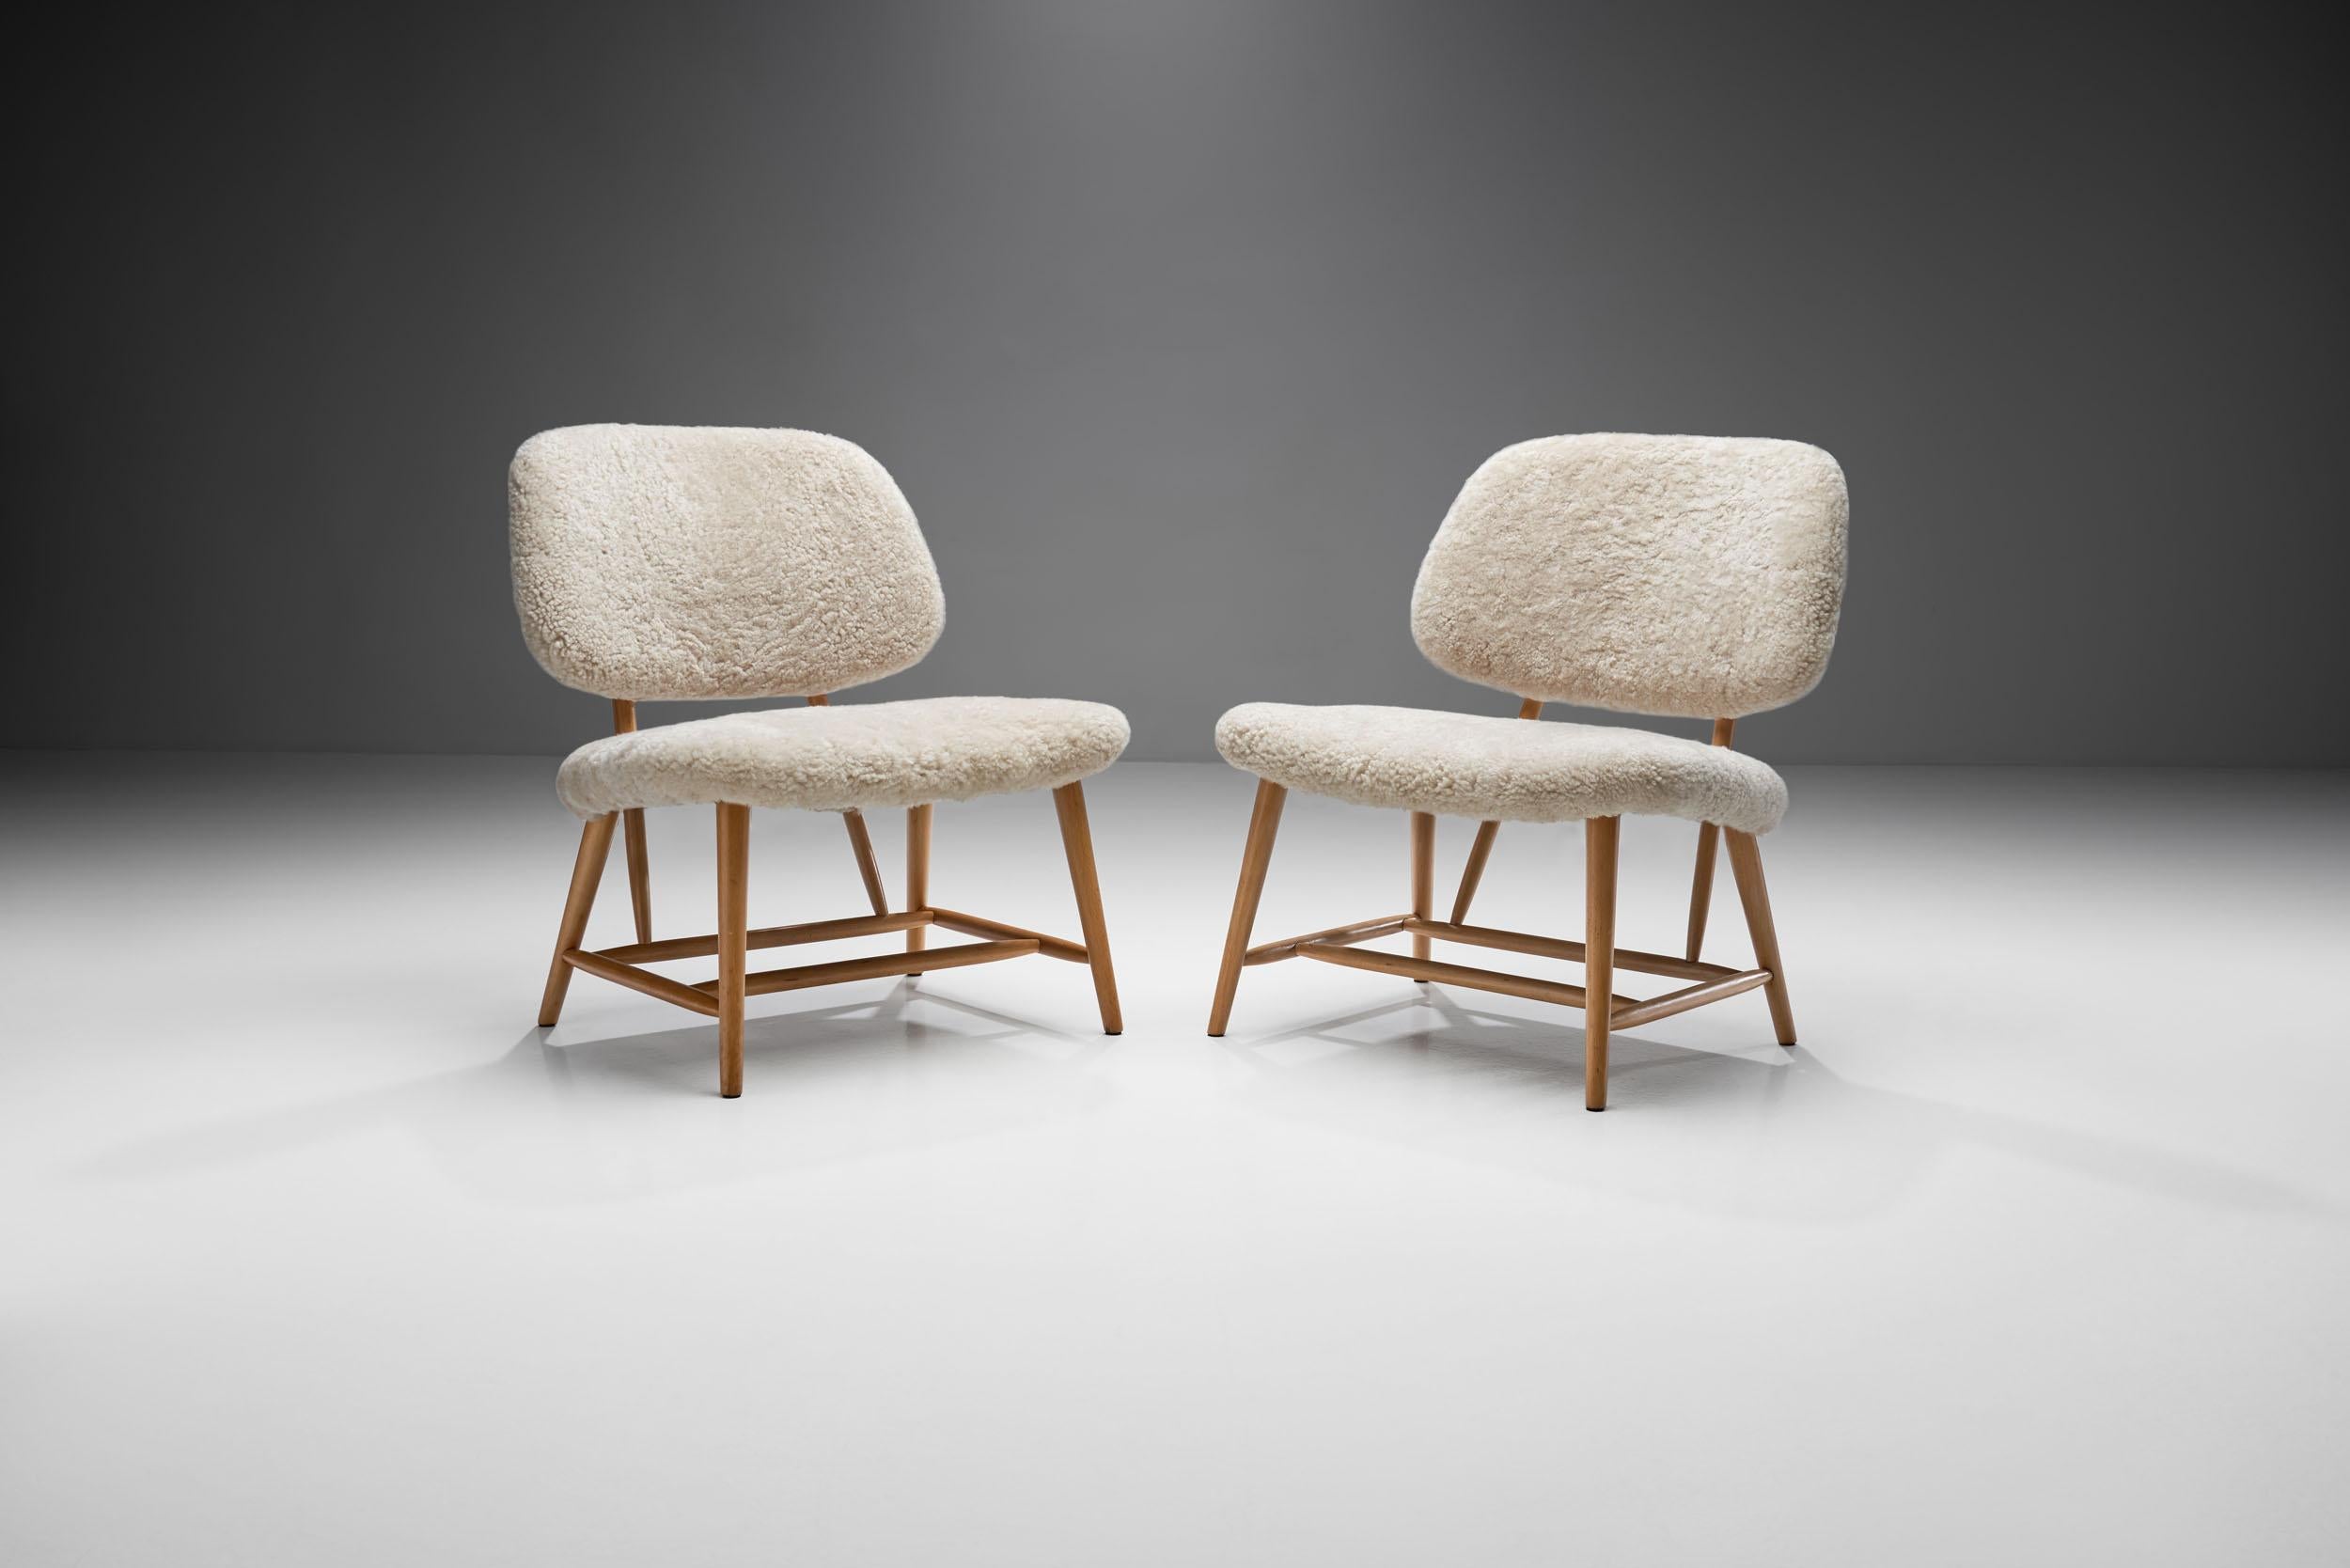 Mid-20th Century Pair of “TeVe” Chairs by Alf Svensson for Studio Ljungs Industrier AB, SWE